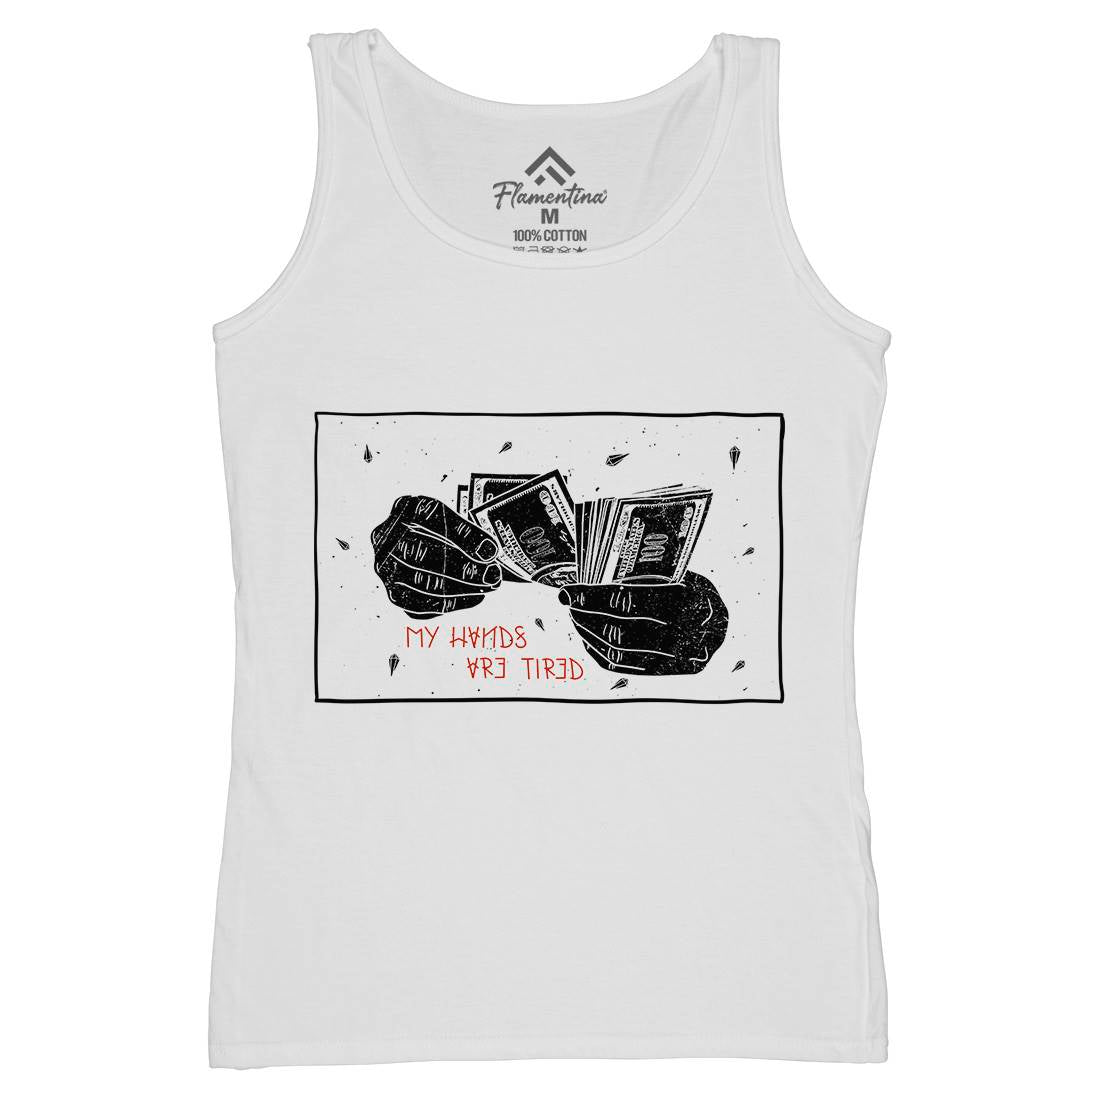 My Hands Are Tired Womens Organic Tank Top Vest Retro D473